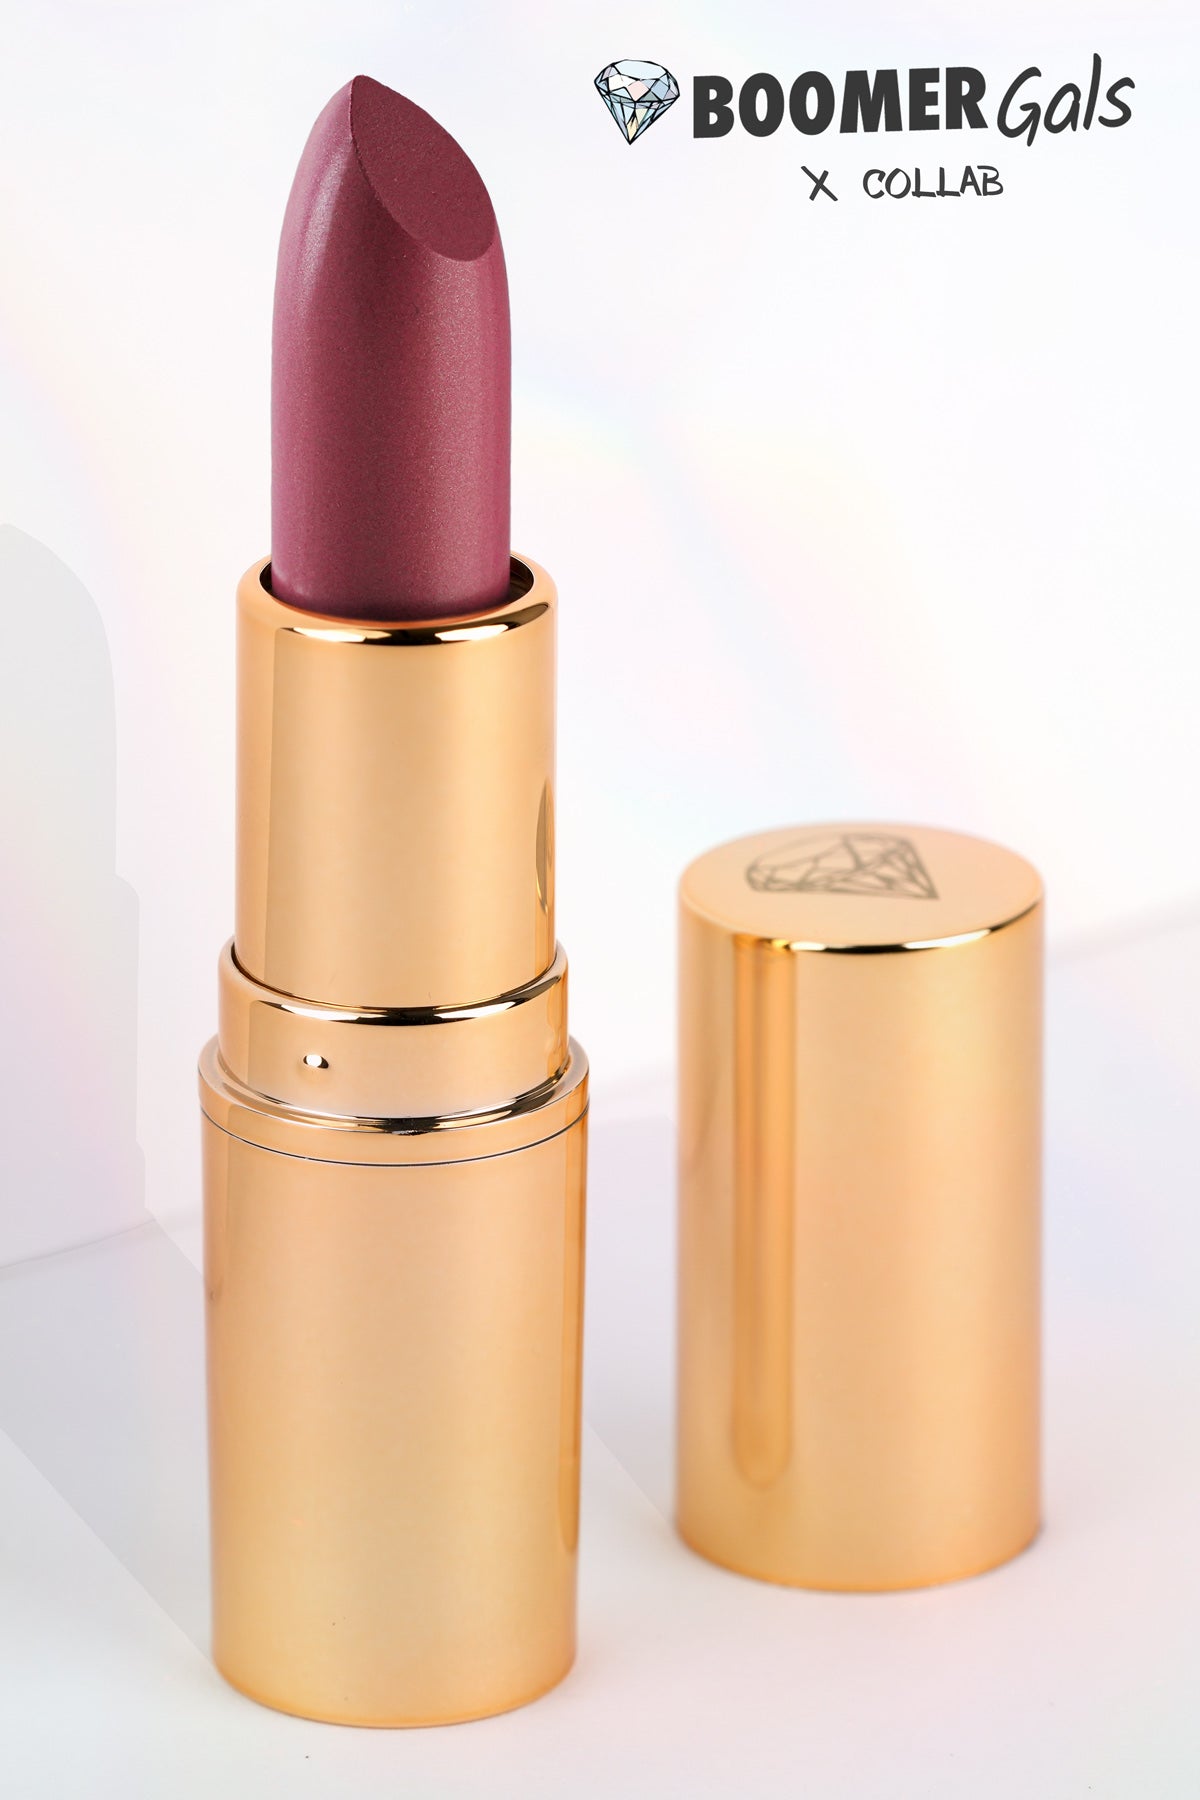 'Mary’s fabulous plum' Boomer Gals - Ultra Lux Hydrating Lipstick